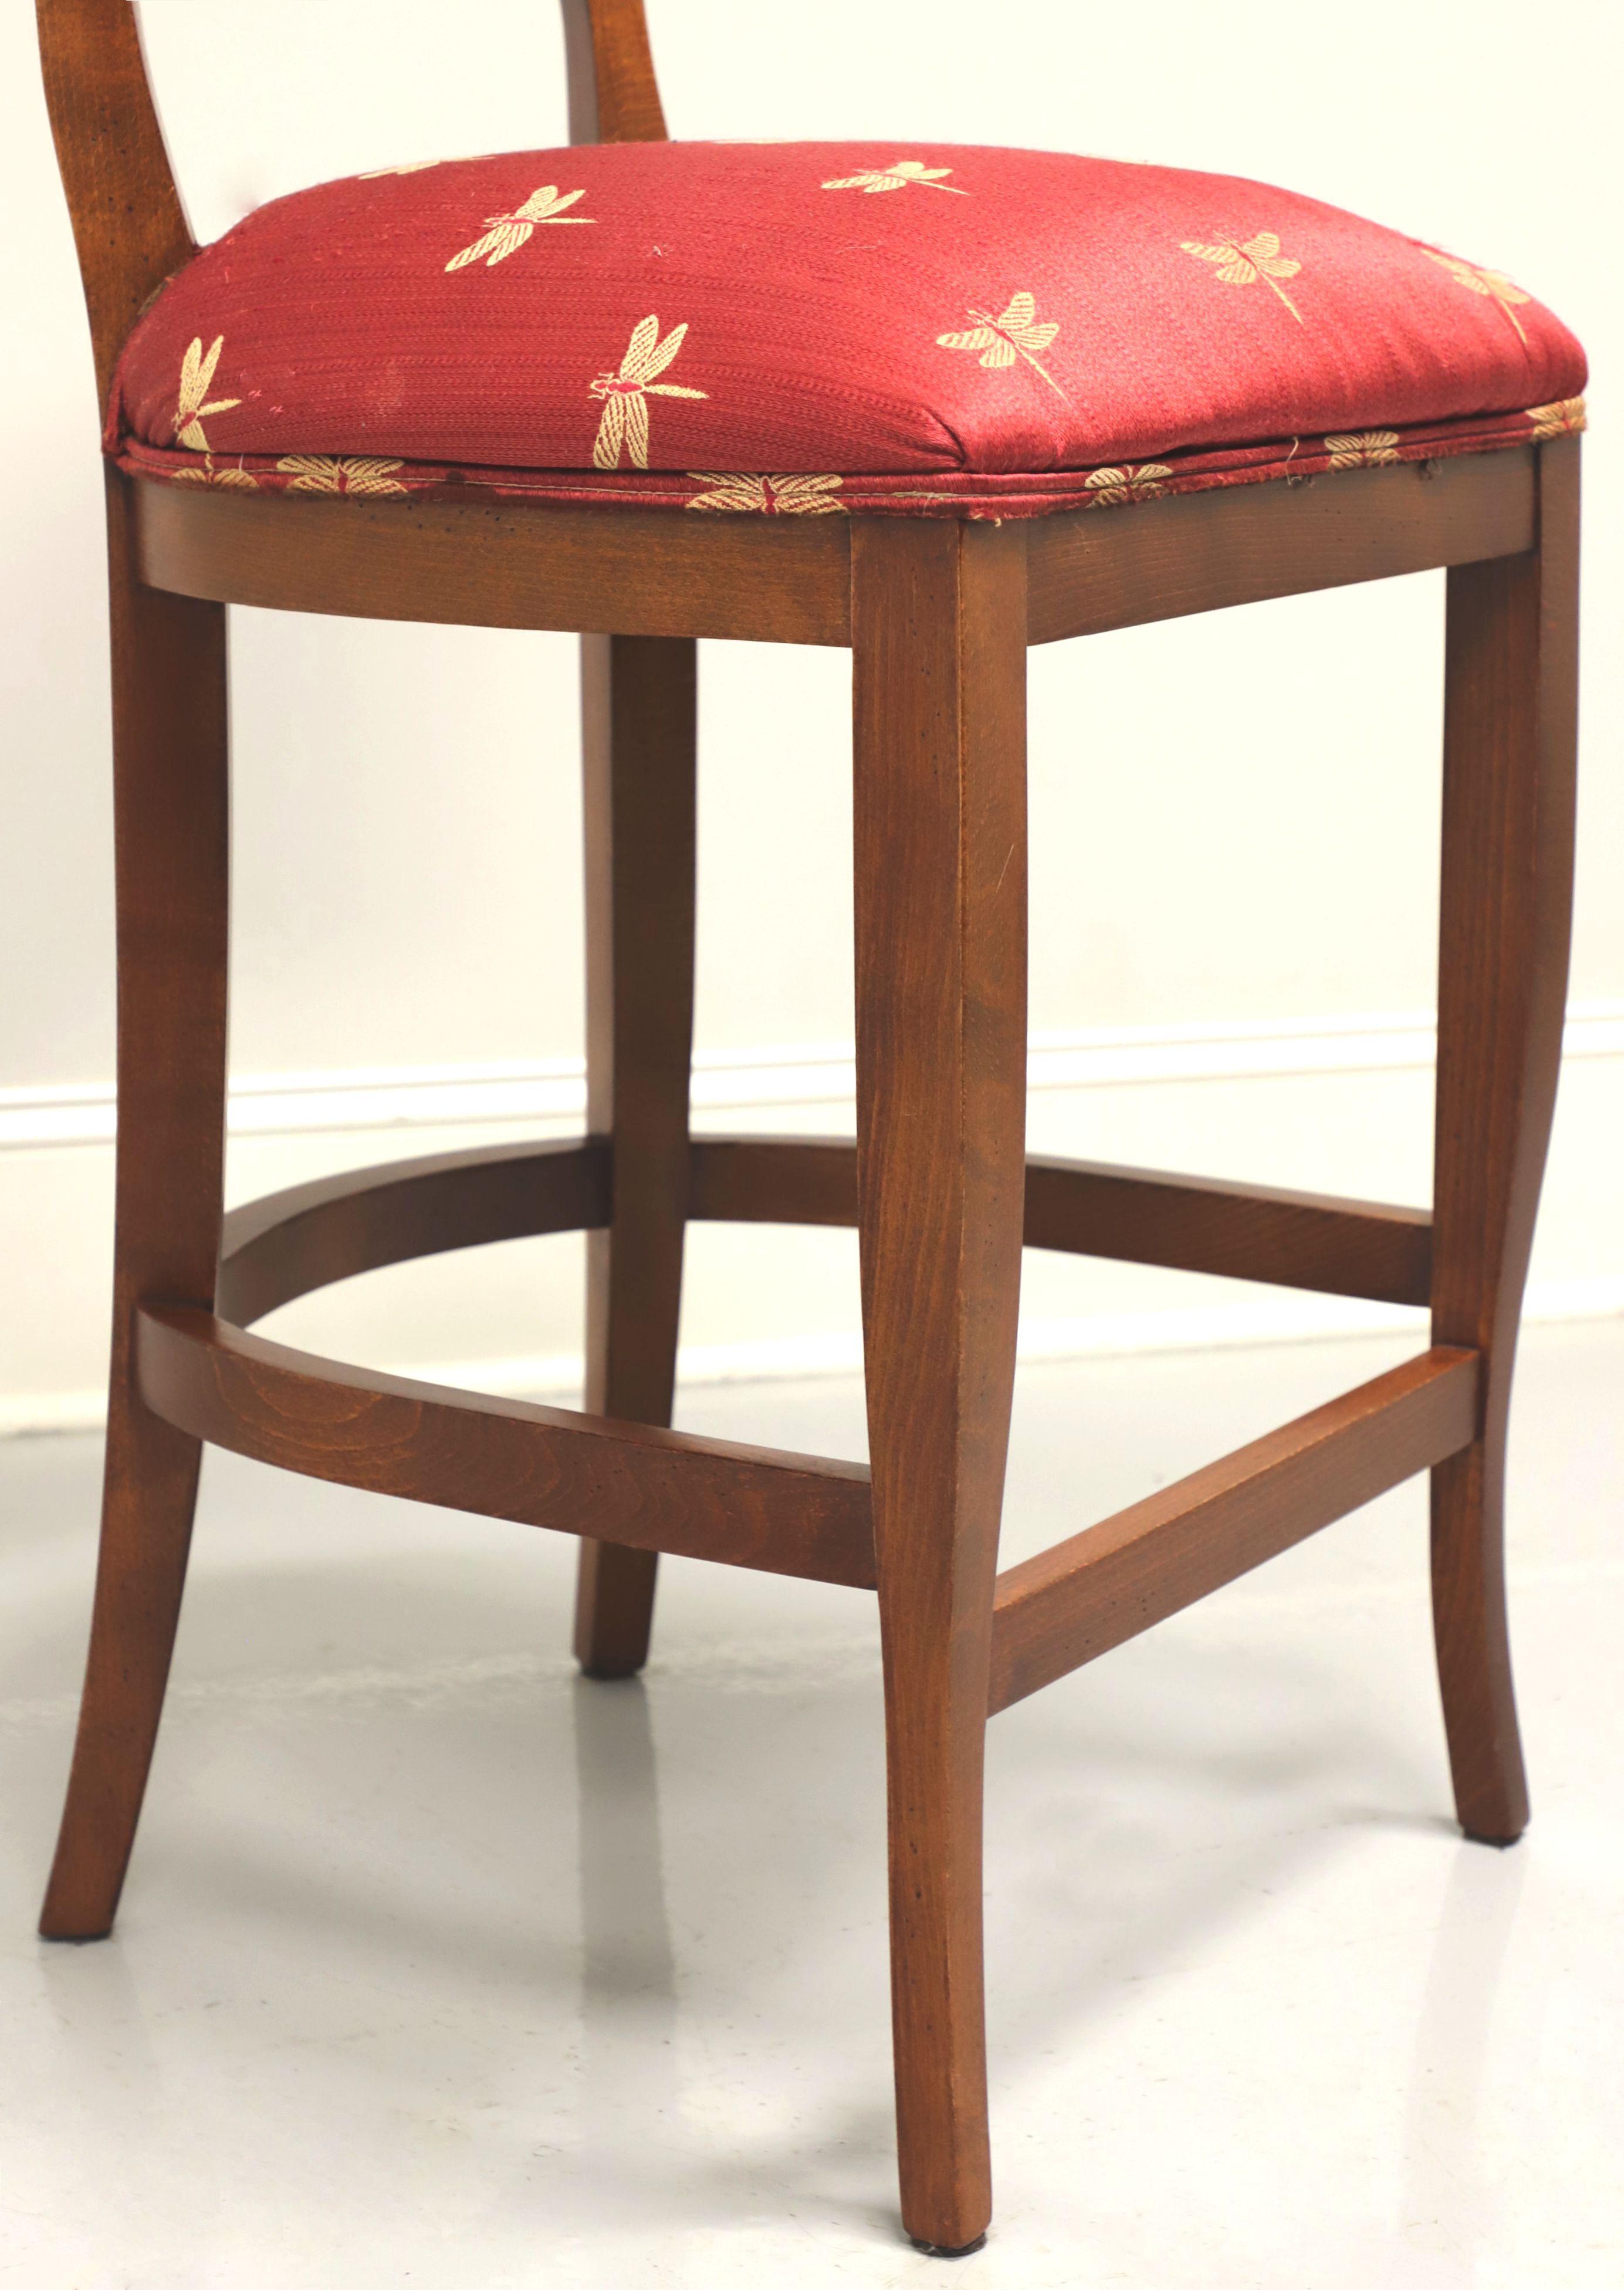 Tiger & Burl Oak Counter Height Stools by EMERSON ET CIE - Pair B 1